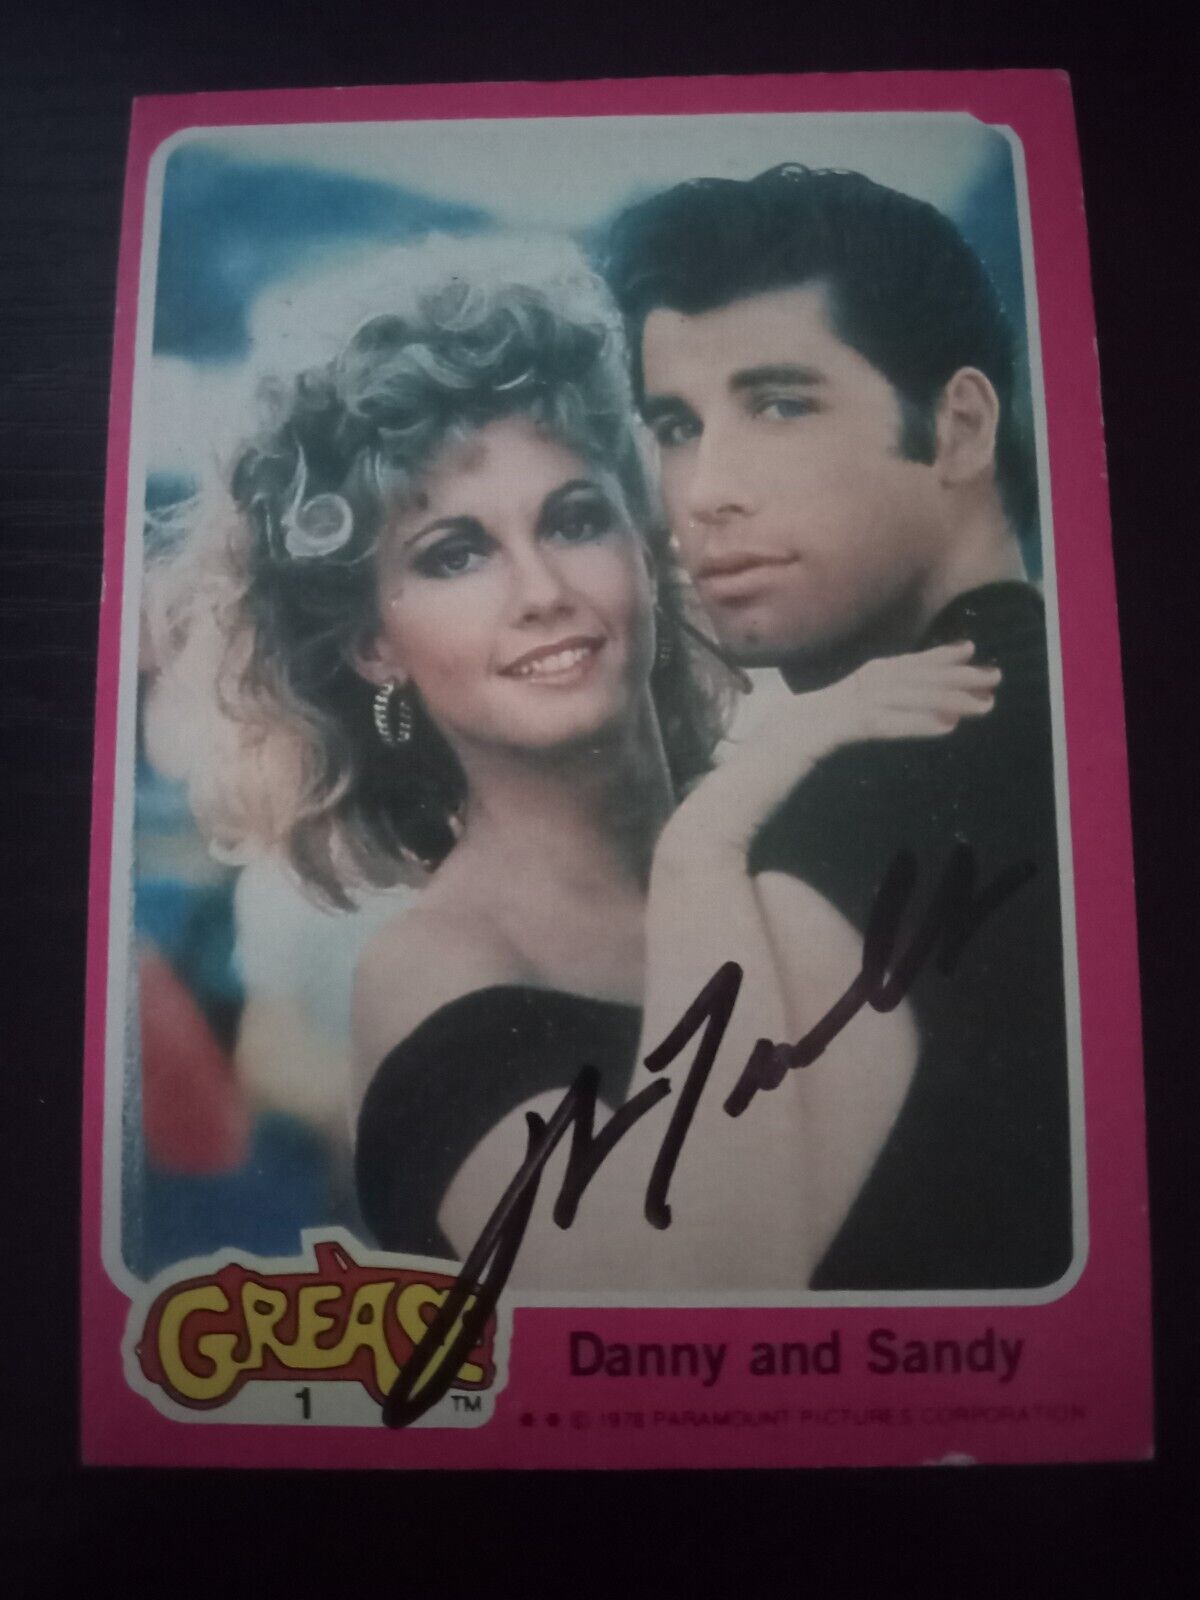 1978 Topps Grease #1 Danny and Sandy autographed by John Travolta